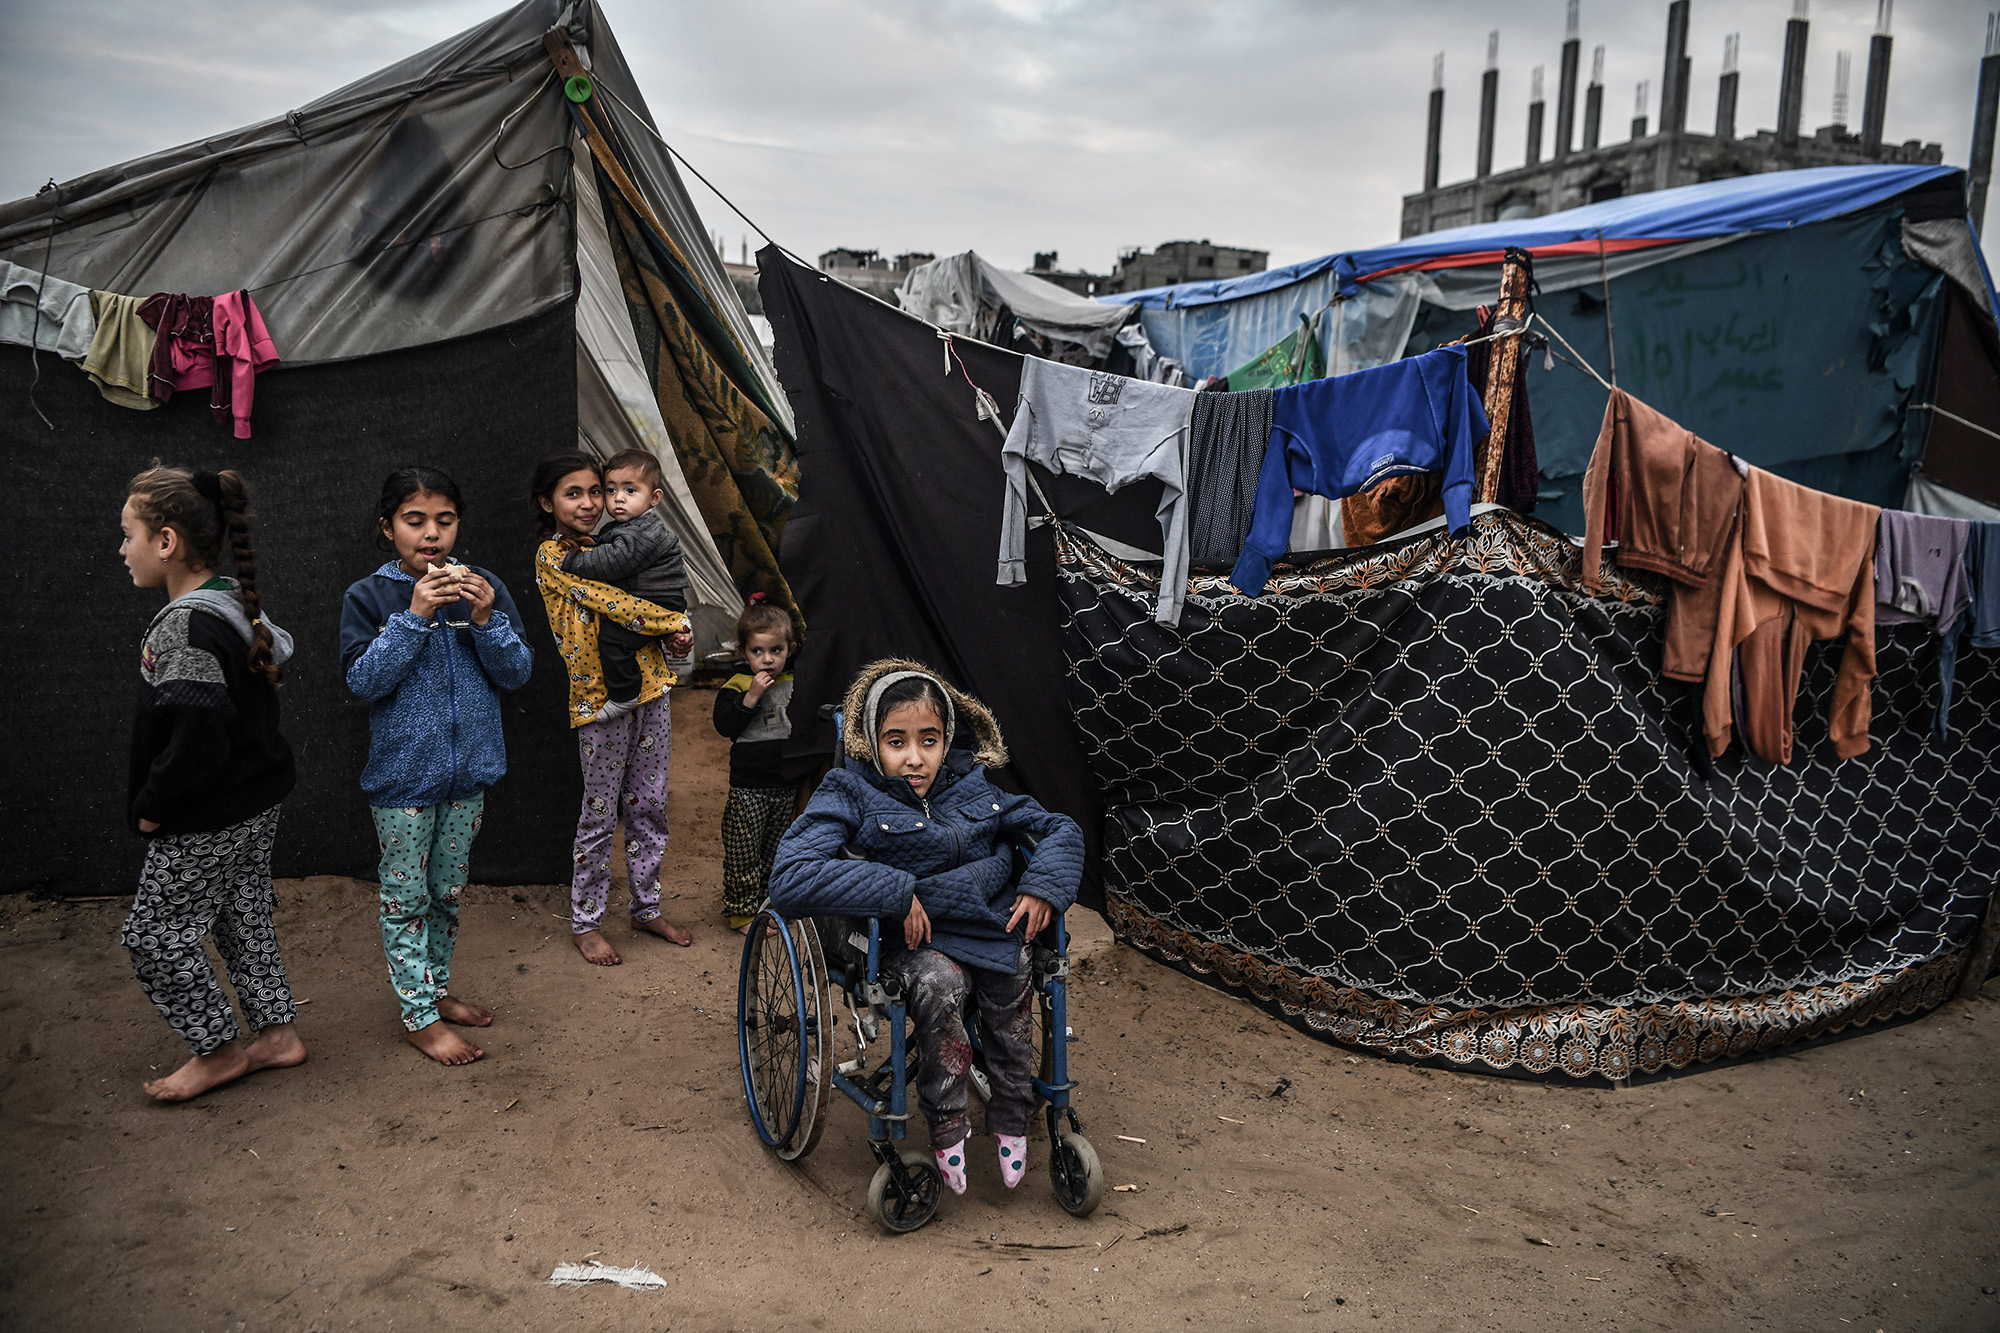 16-year-old Palestinian Nida Abid, center, who was born with a walking disability, is seen with a wheelchair amid the makeshift tents in Rafah, Gaza on February 5. Abid and her family left their homes and took refuge in Rafah.